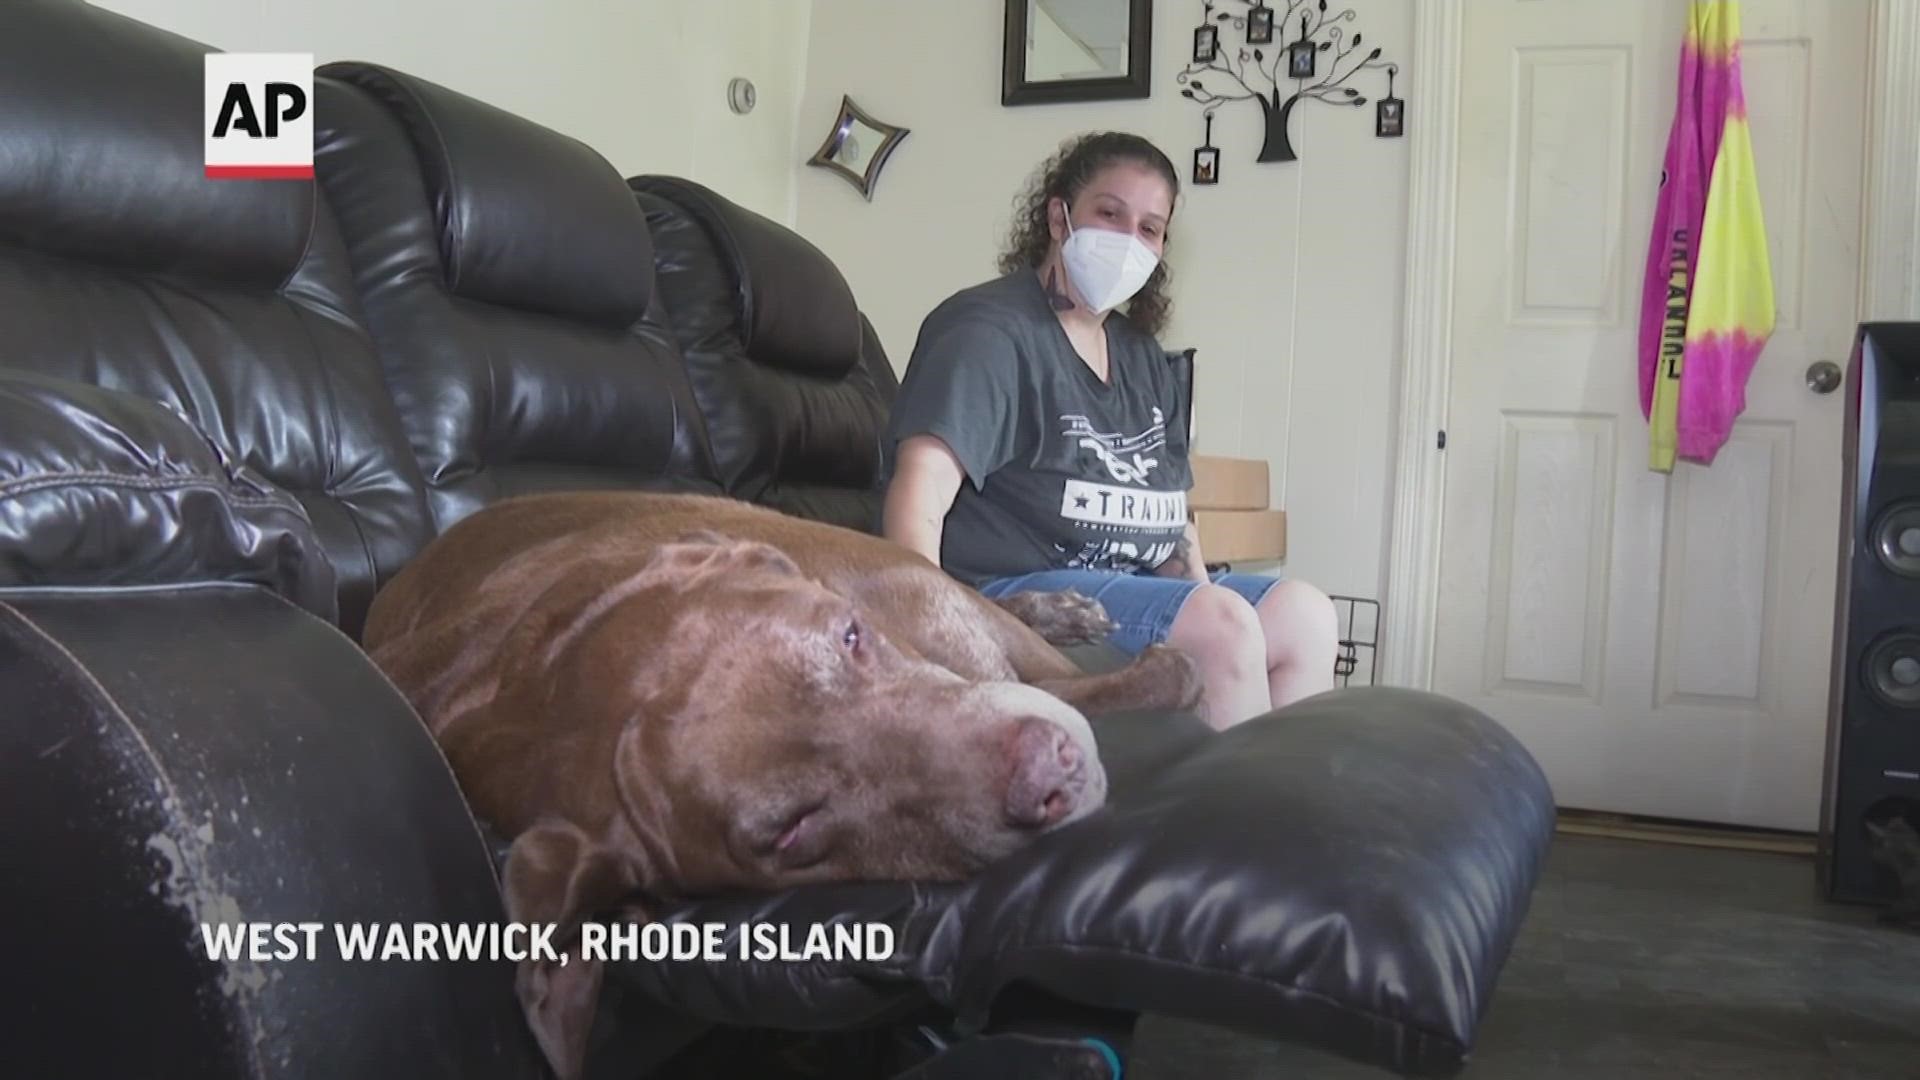 A federal eviction moratorium ends Saturday, causing anguish for those who are about to lose their apartments, like Rhode Island resident Roxanne Schaefer.